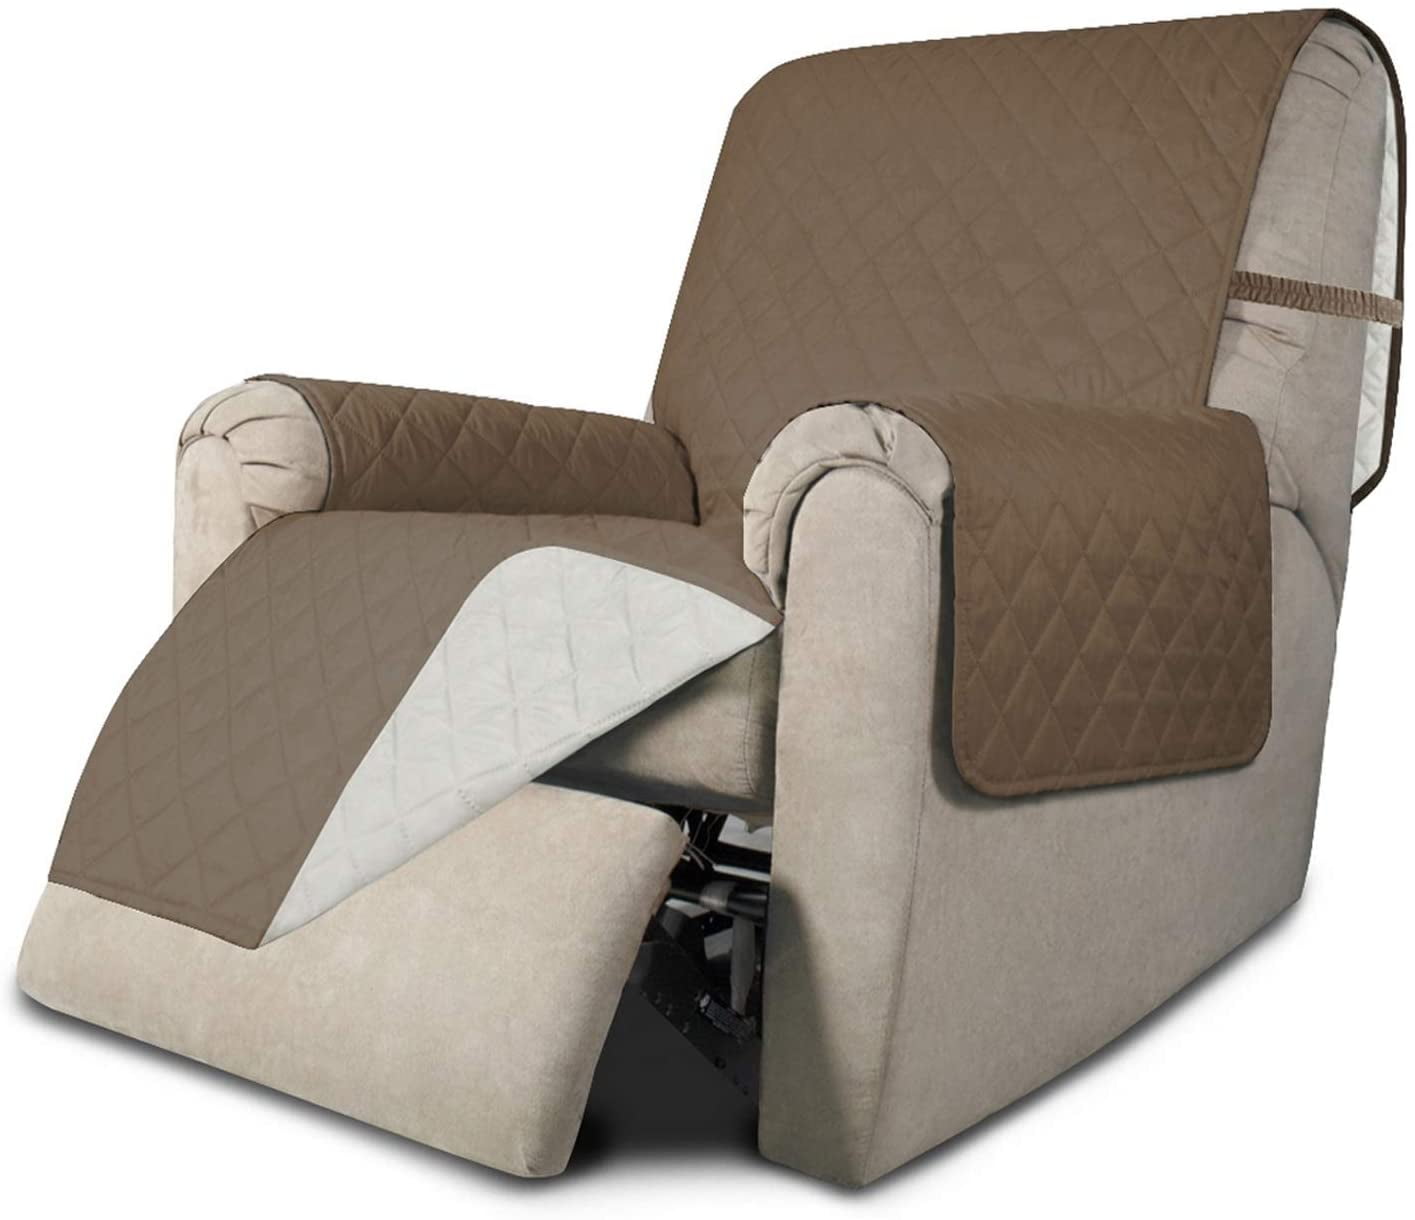 Details about   Reversible Recliner Arm Chair Cover Lazy Boy Protector Wide Elastic Straps NEW 